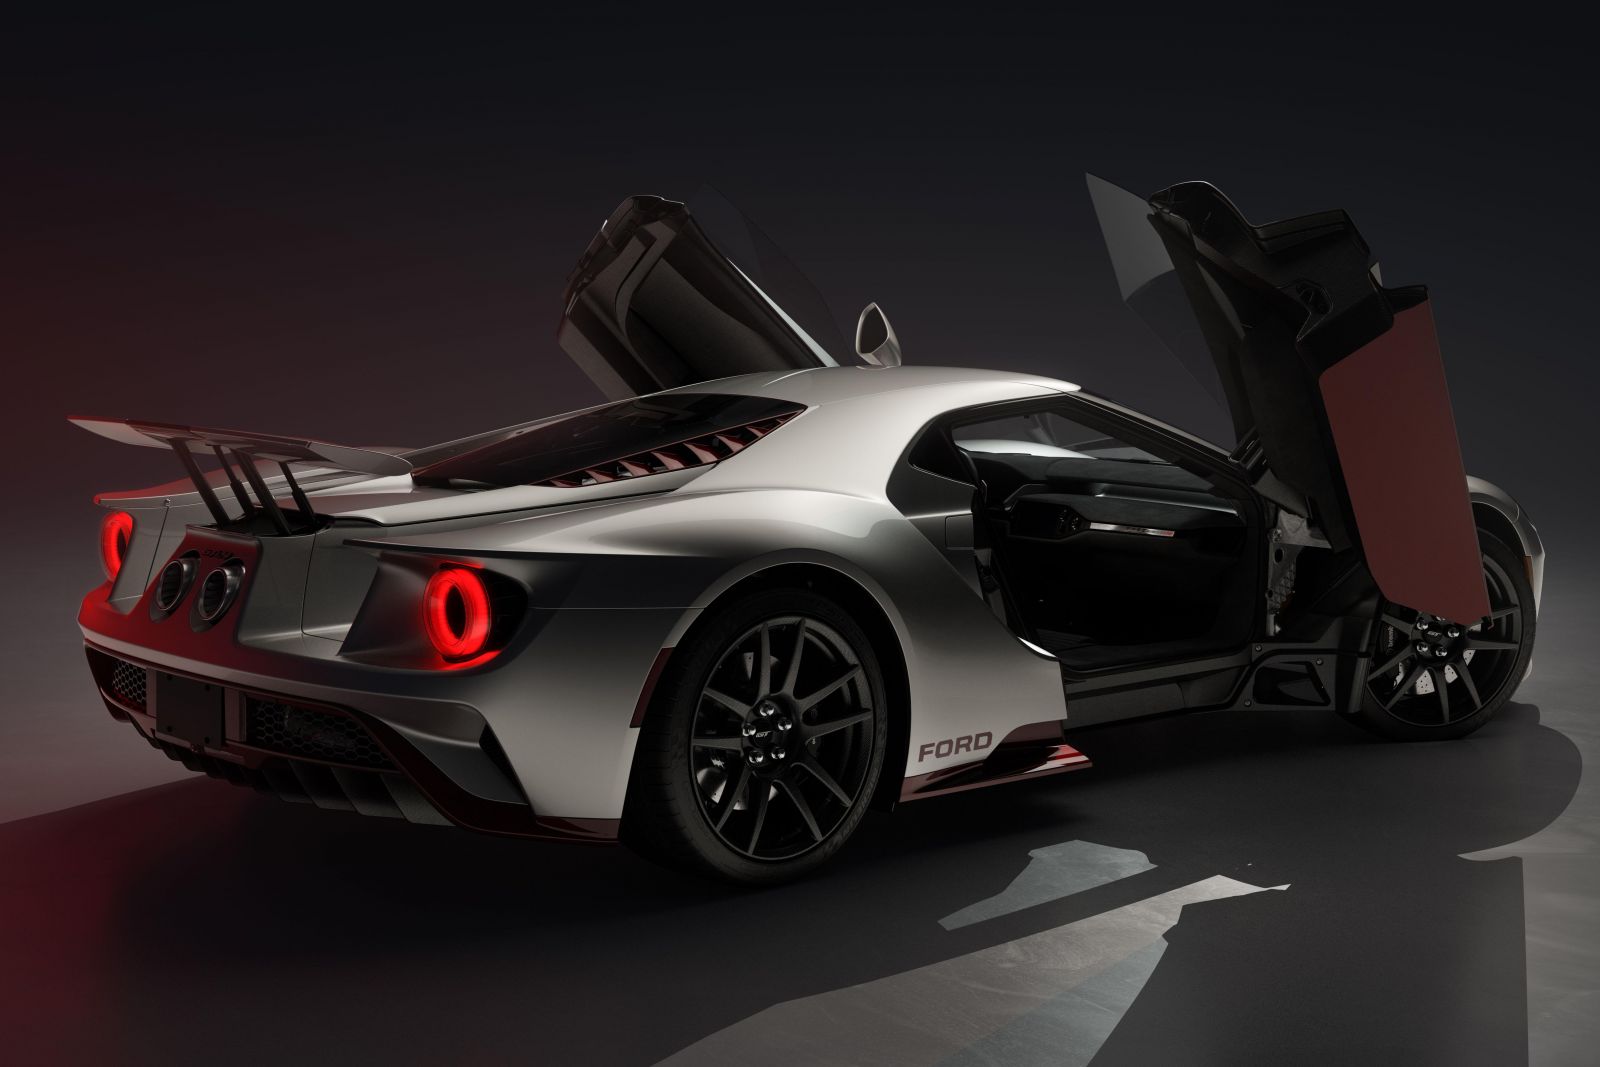 Ford GT LM Edition Supercar bows out with special model CarExpert